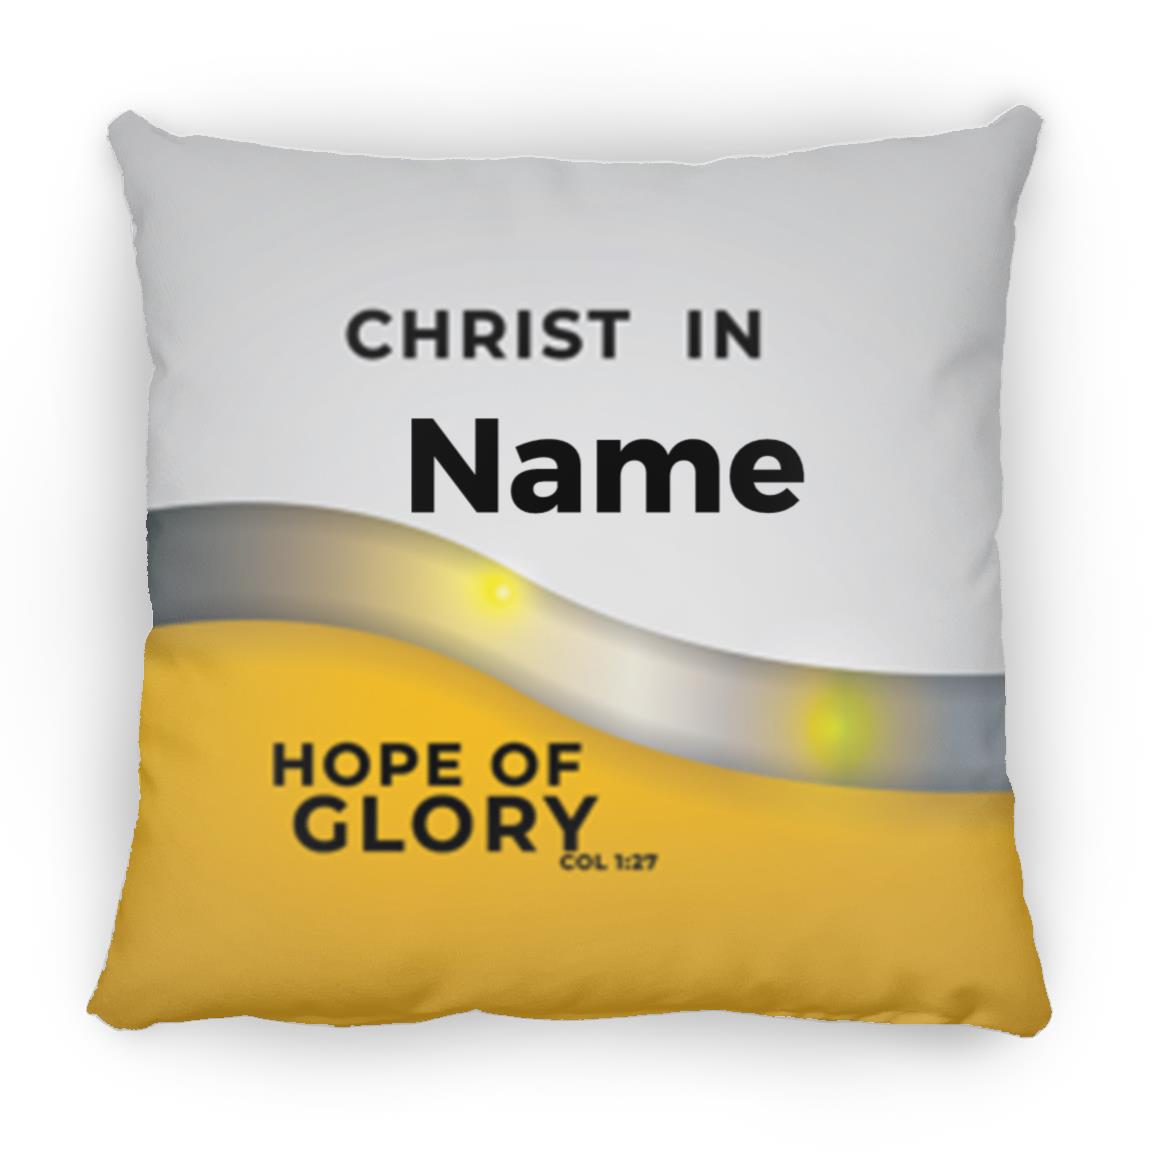 Pillows - Scriptural Personalizable Pillow - Christ In Me, The Hope Of Glory - 18x18